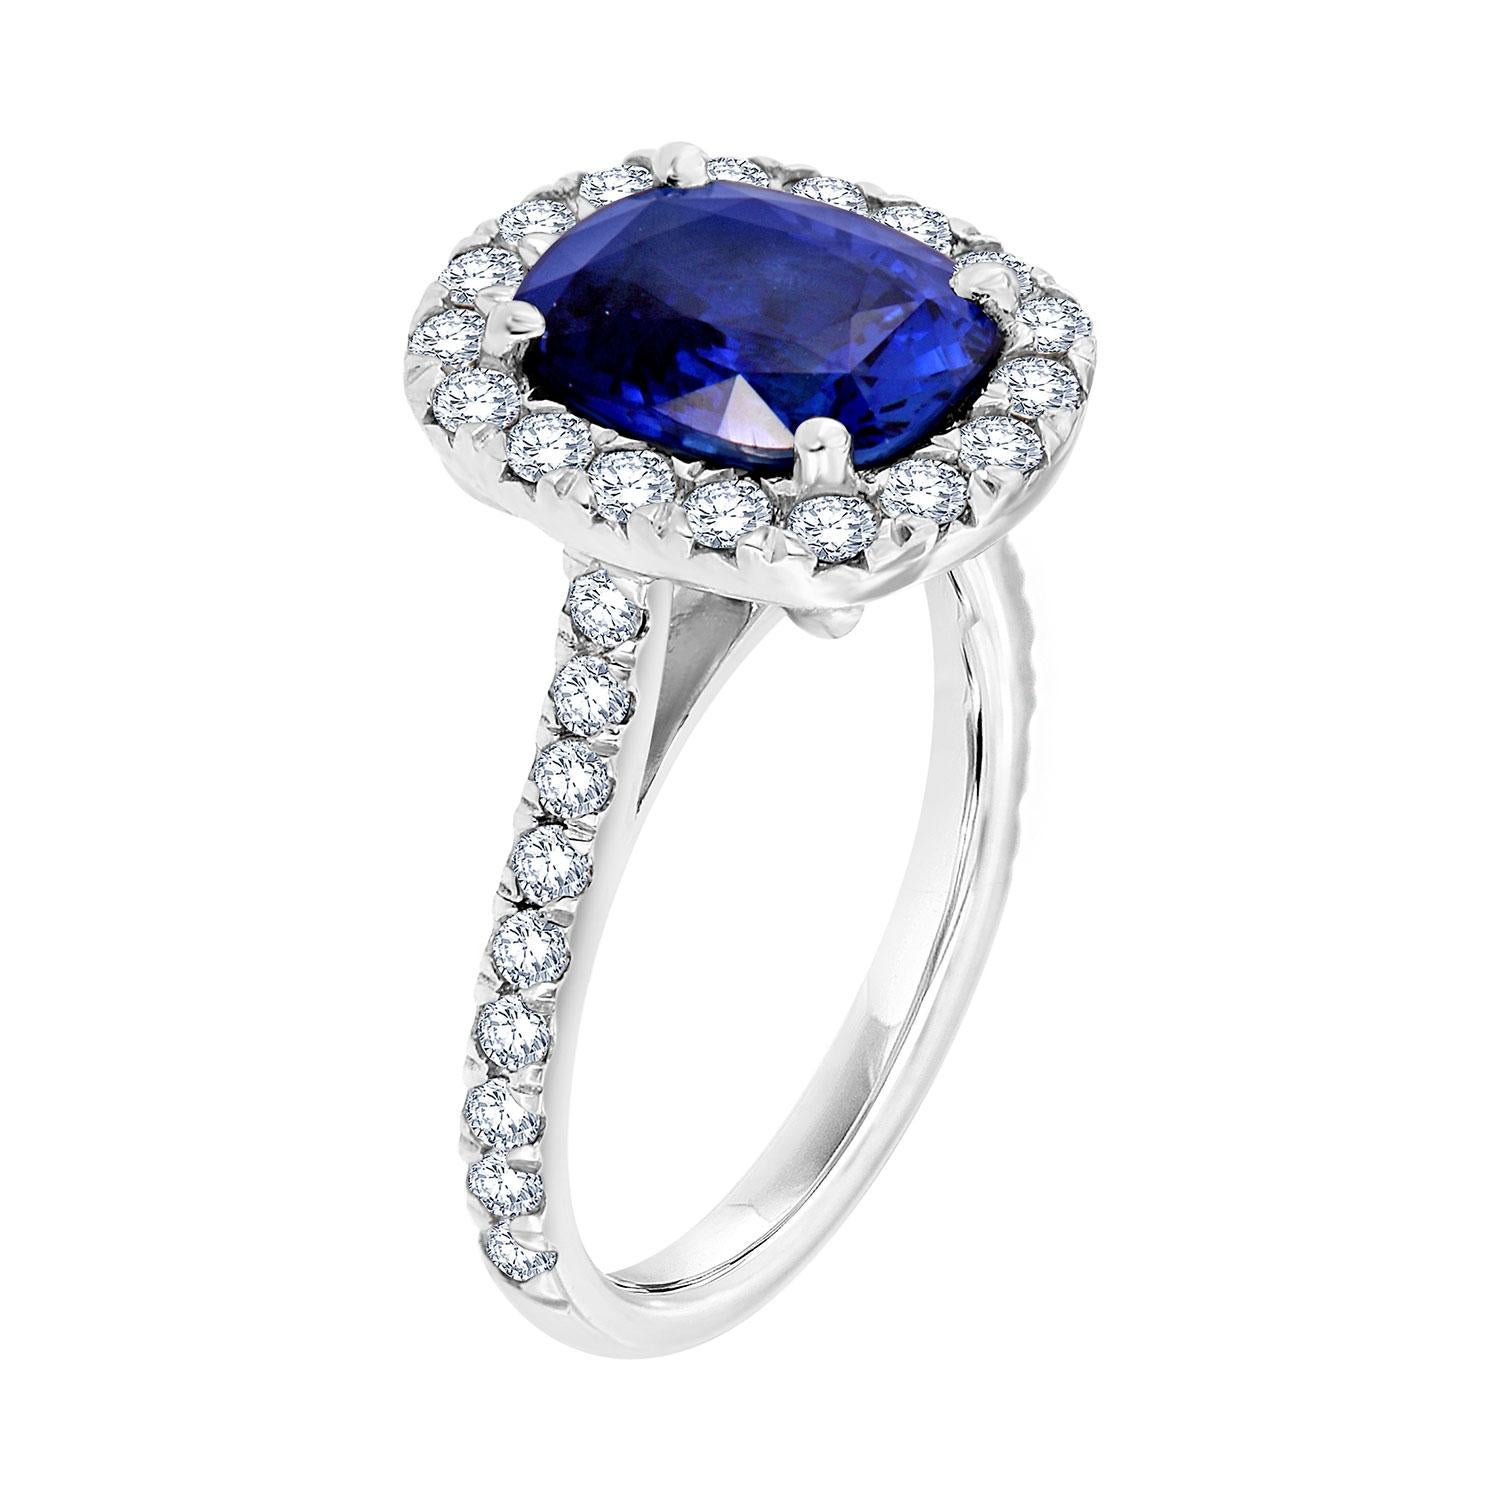 This stunning platinum ring features an Elongate Cushion 3.57 carat Blue Sapphire from Sri-Lanka GIA Certificate 6213629948. The sapphire is encircled by brilliant round diamonds that showcase its vibrant blue color. A row of perfectly matched